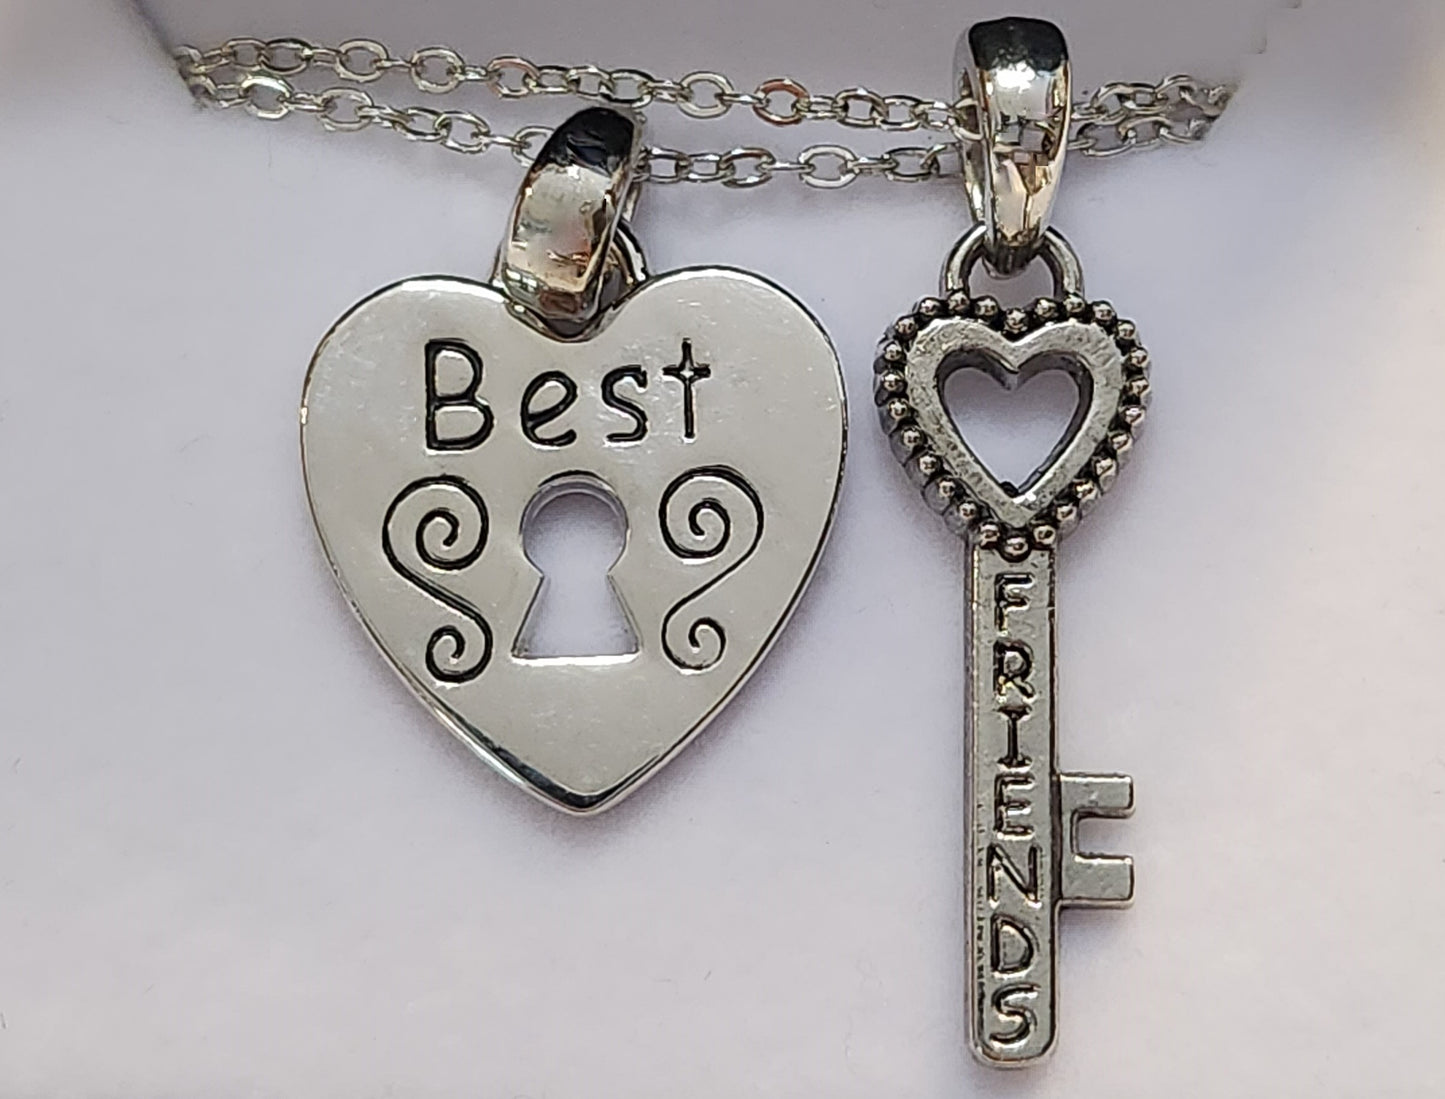 Fashion jewellery chain and pendant with heart and key for best friends